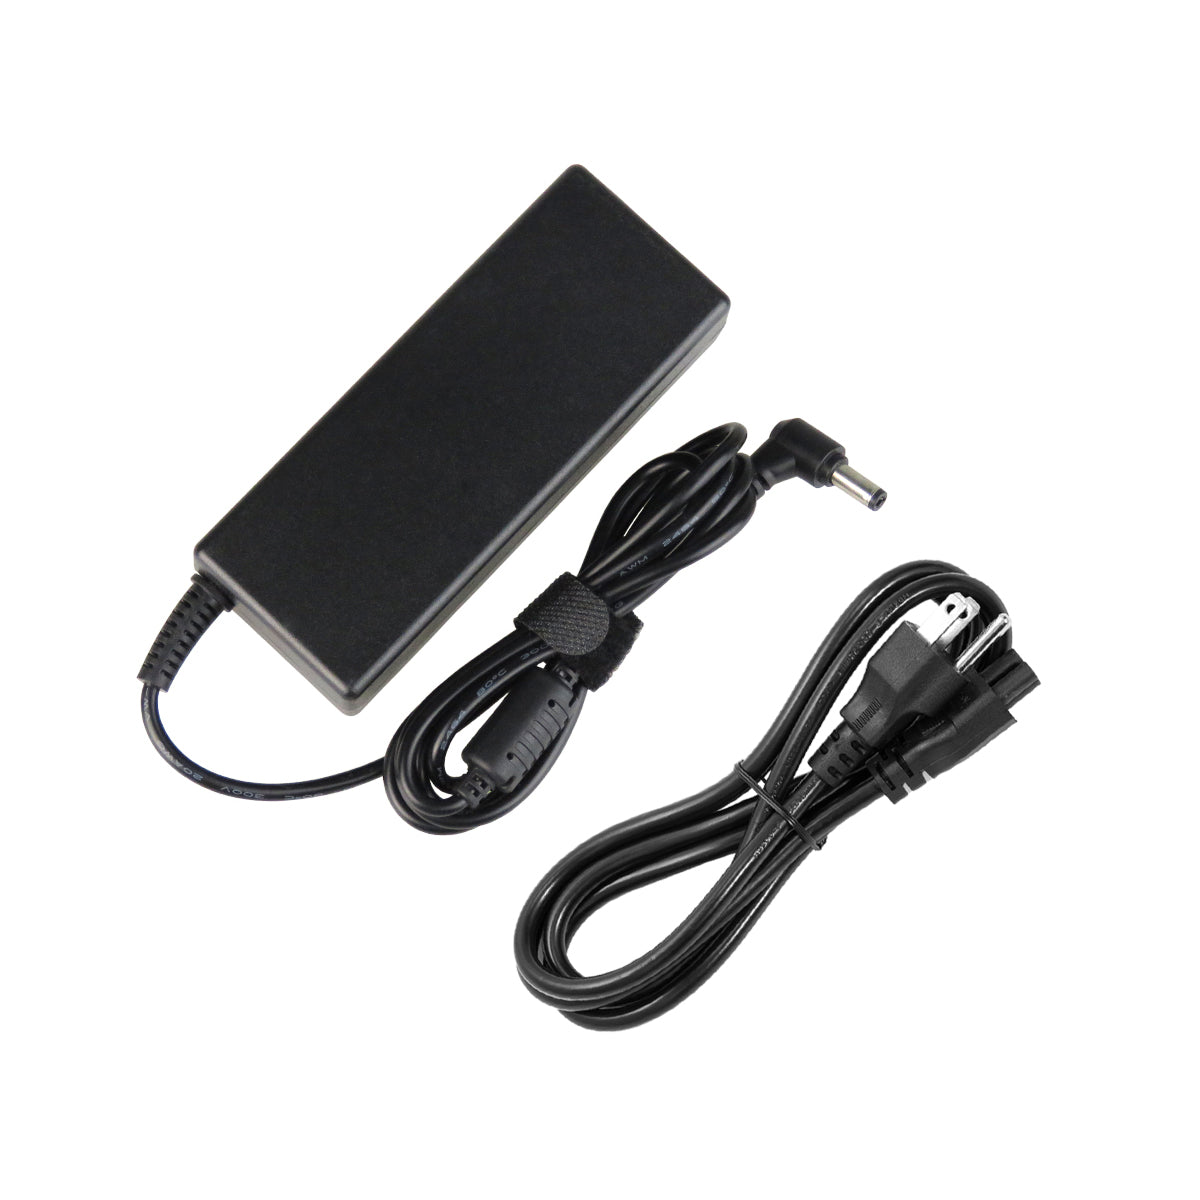 AC Adapter Charger for ASUS F45 Notebook.